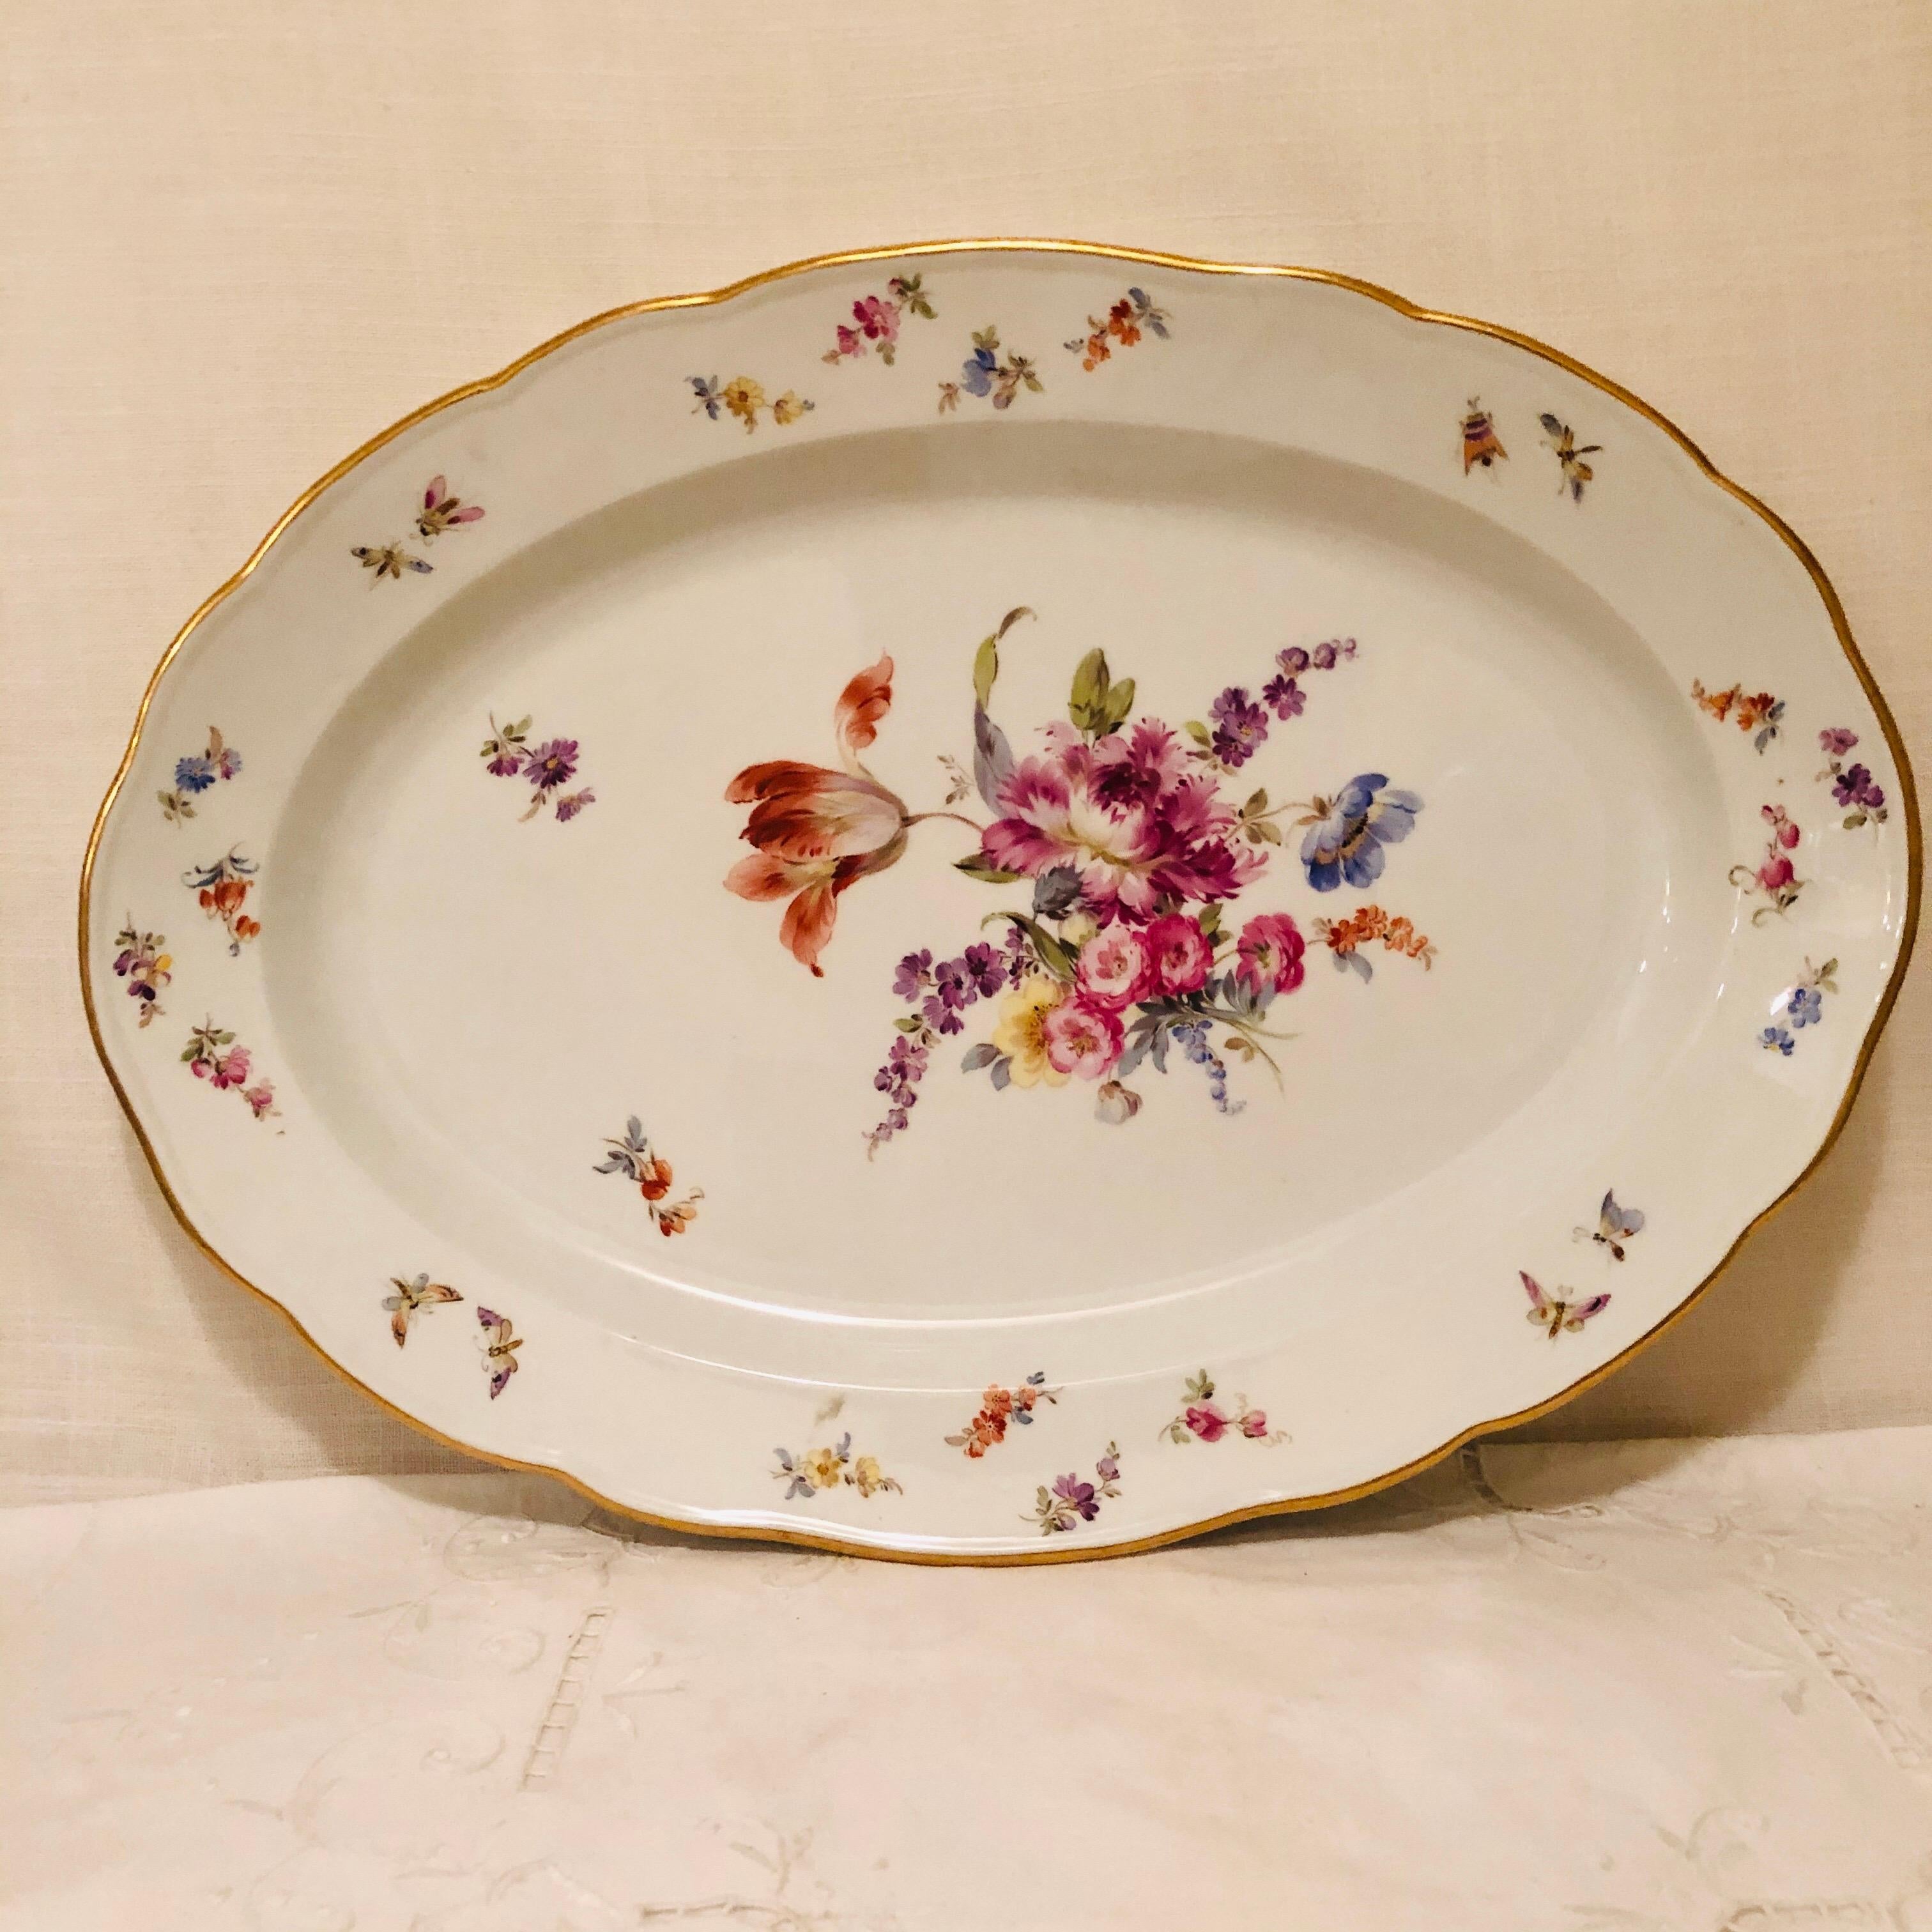 Hand-Painted Large Meissen Platter with Fabulous Painting of a Bouquet of Flowers and Insects